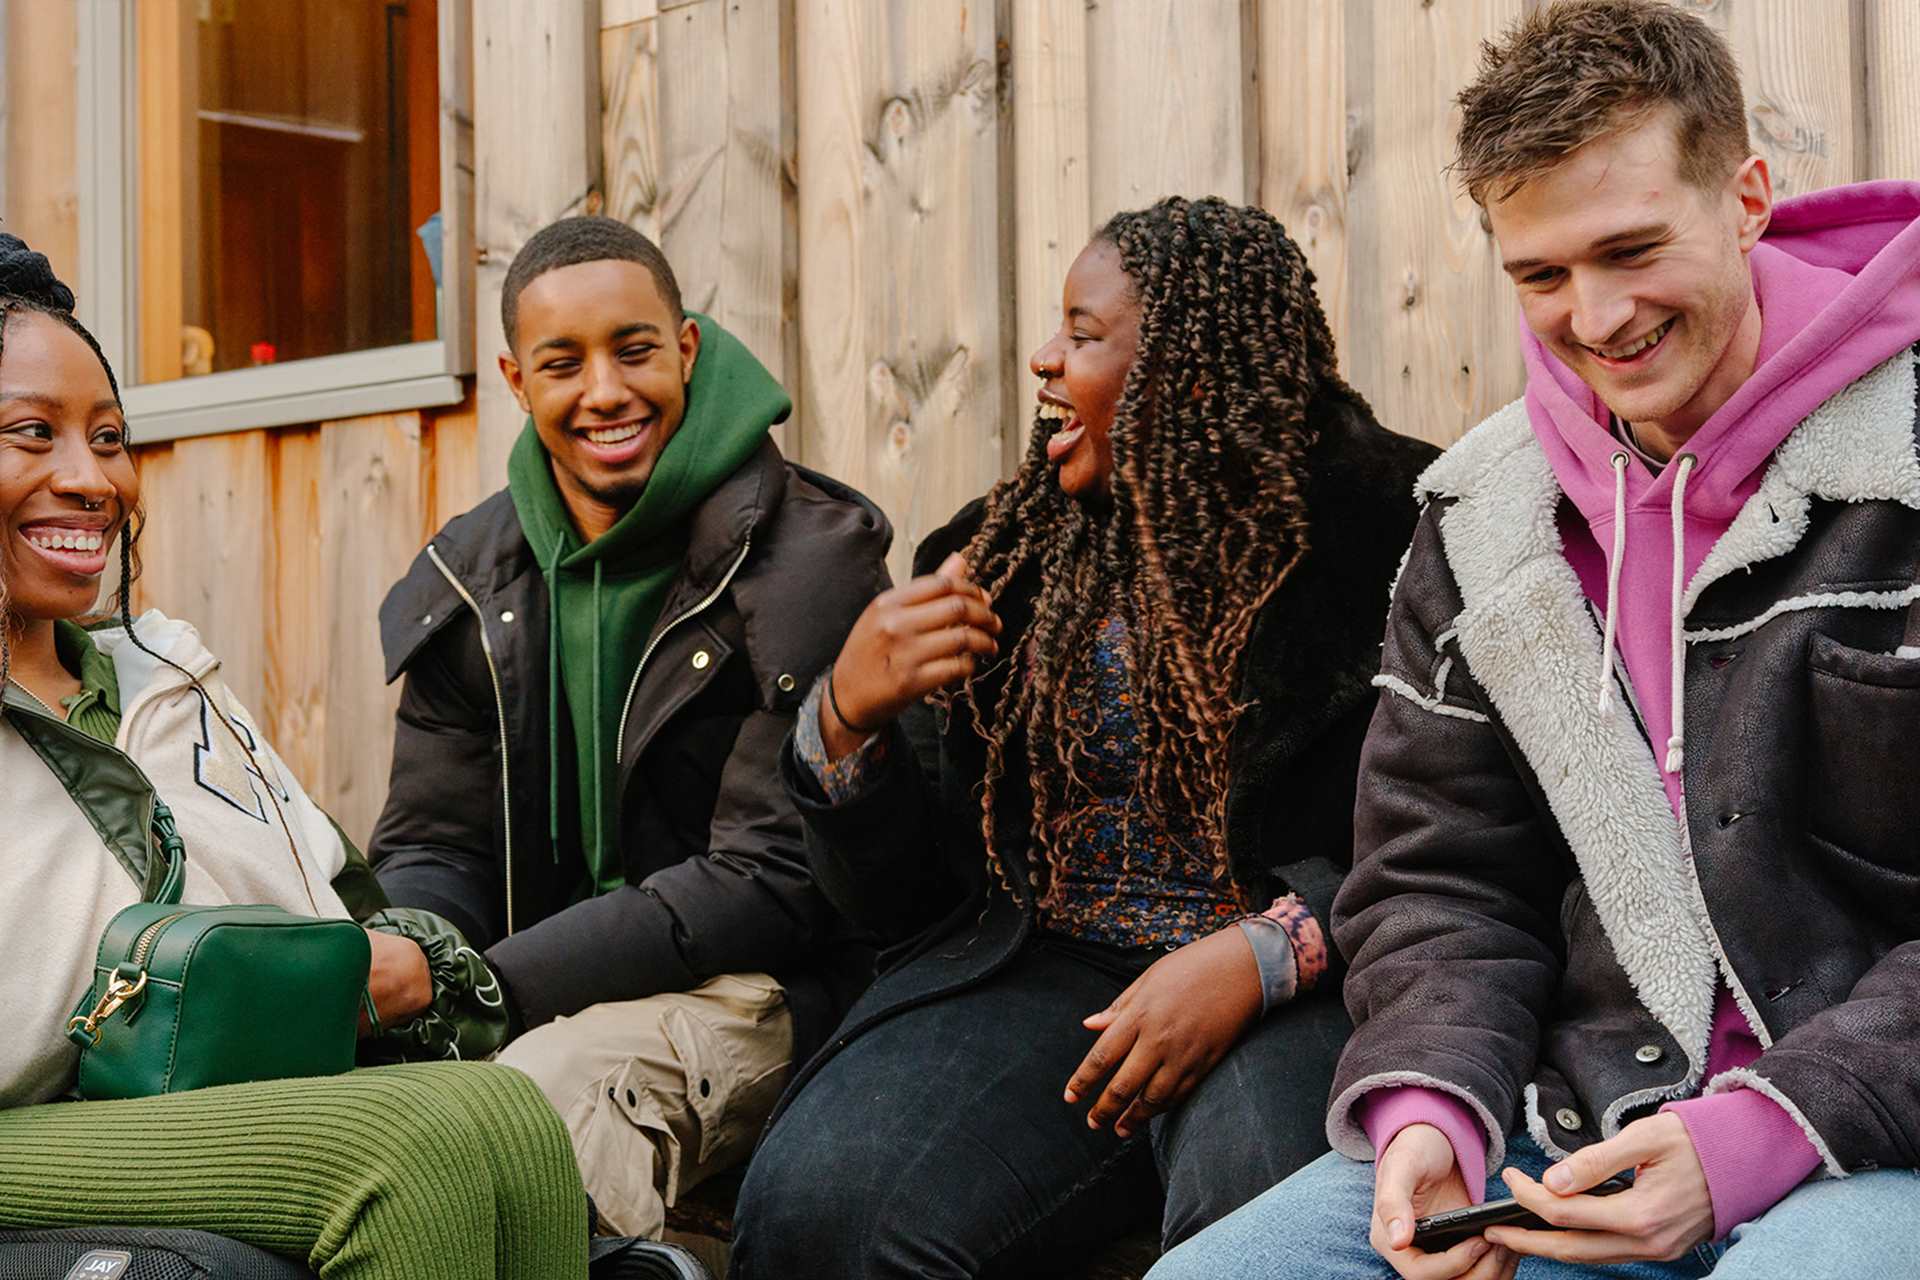 A group of young people laughing together outside on a bench. Group includes two black girls (one in a wheelchair), one black boy, and a white boy.